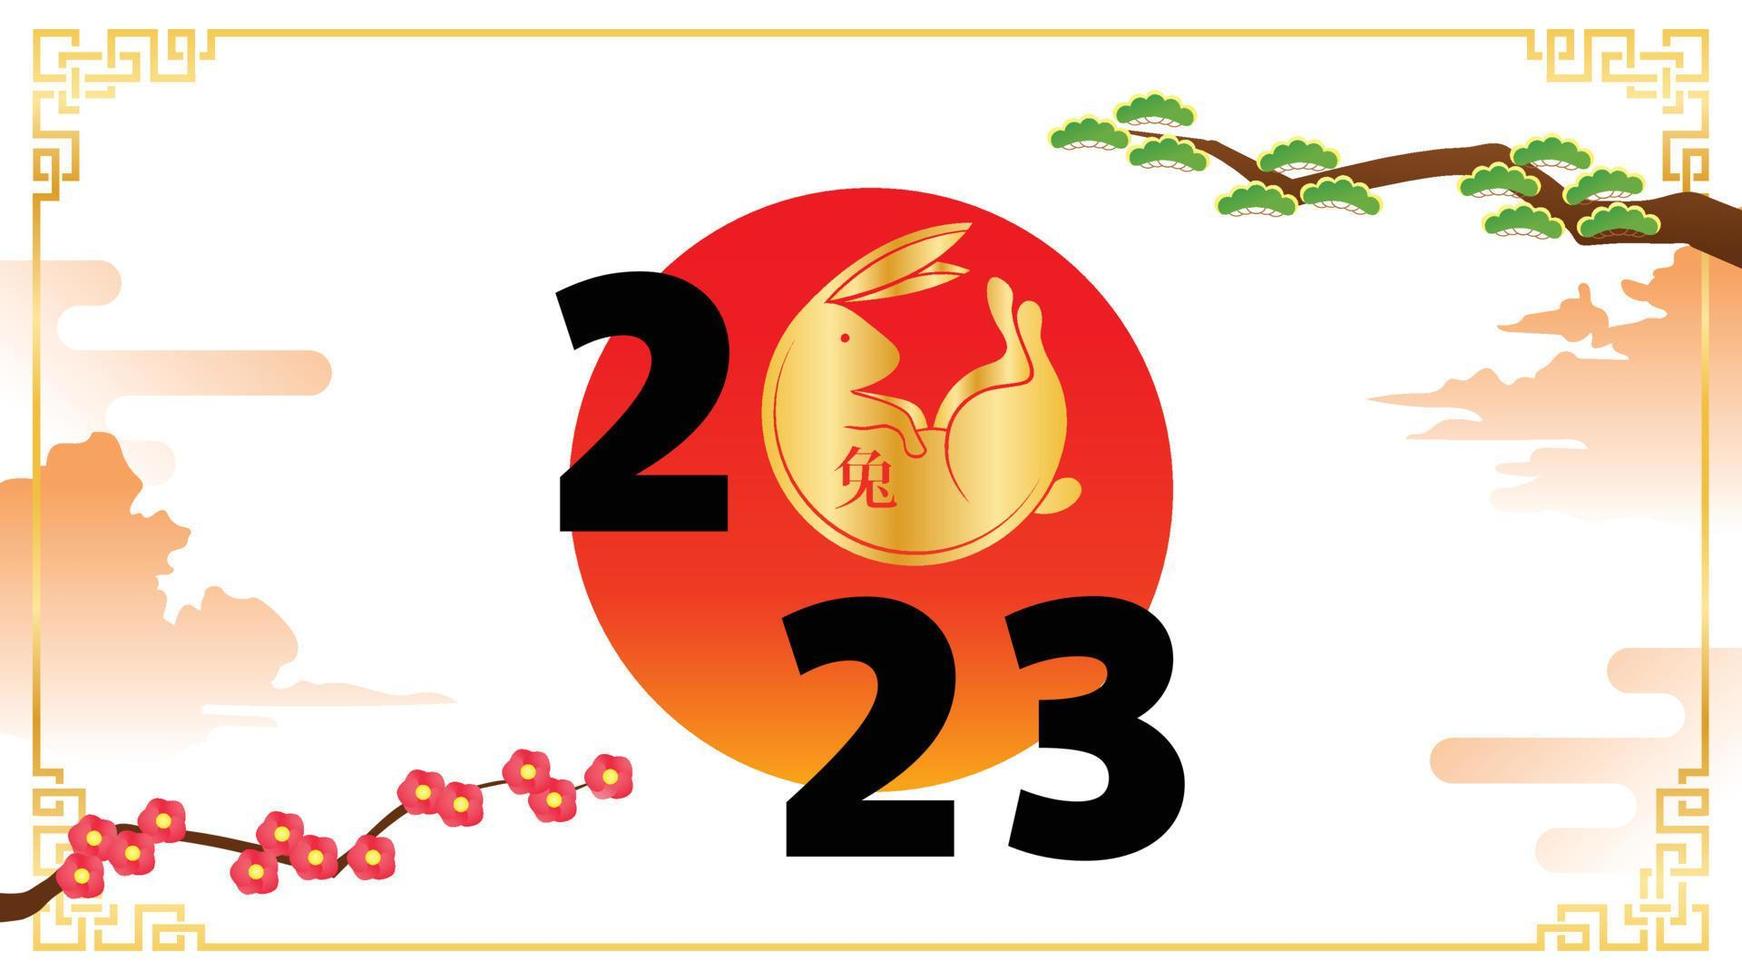 Chinese new year 2023 banner vector illustration